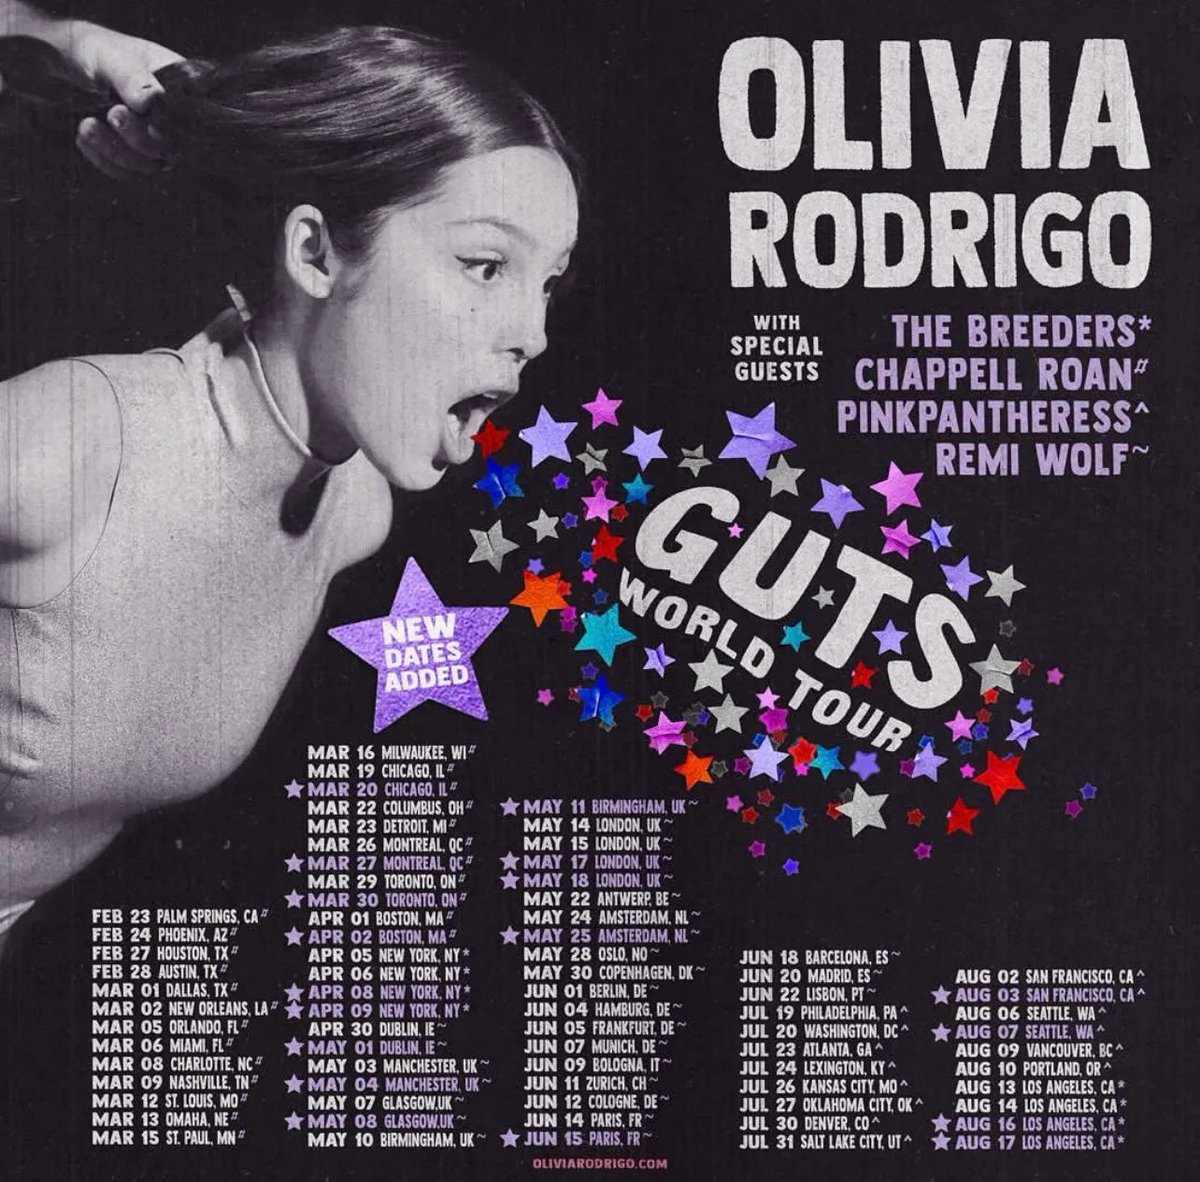 .@oliviarodrigo adds 18 new dates to her ‘GUTS’ World Tour - including 5 more shows in the UK.